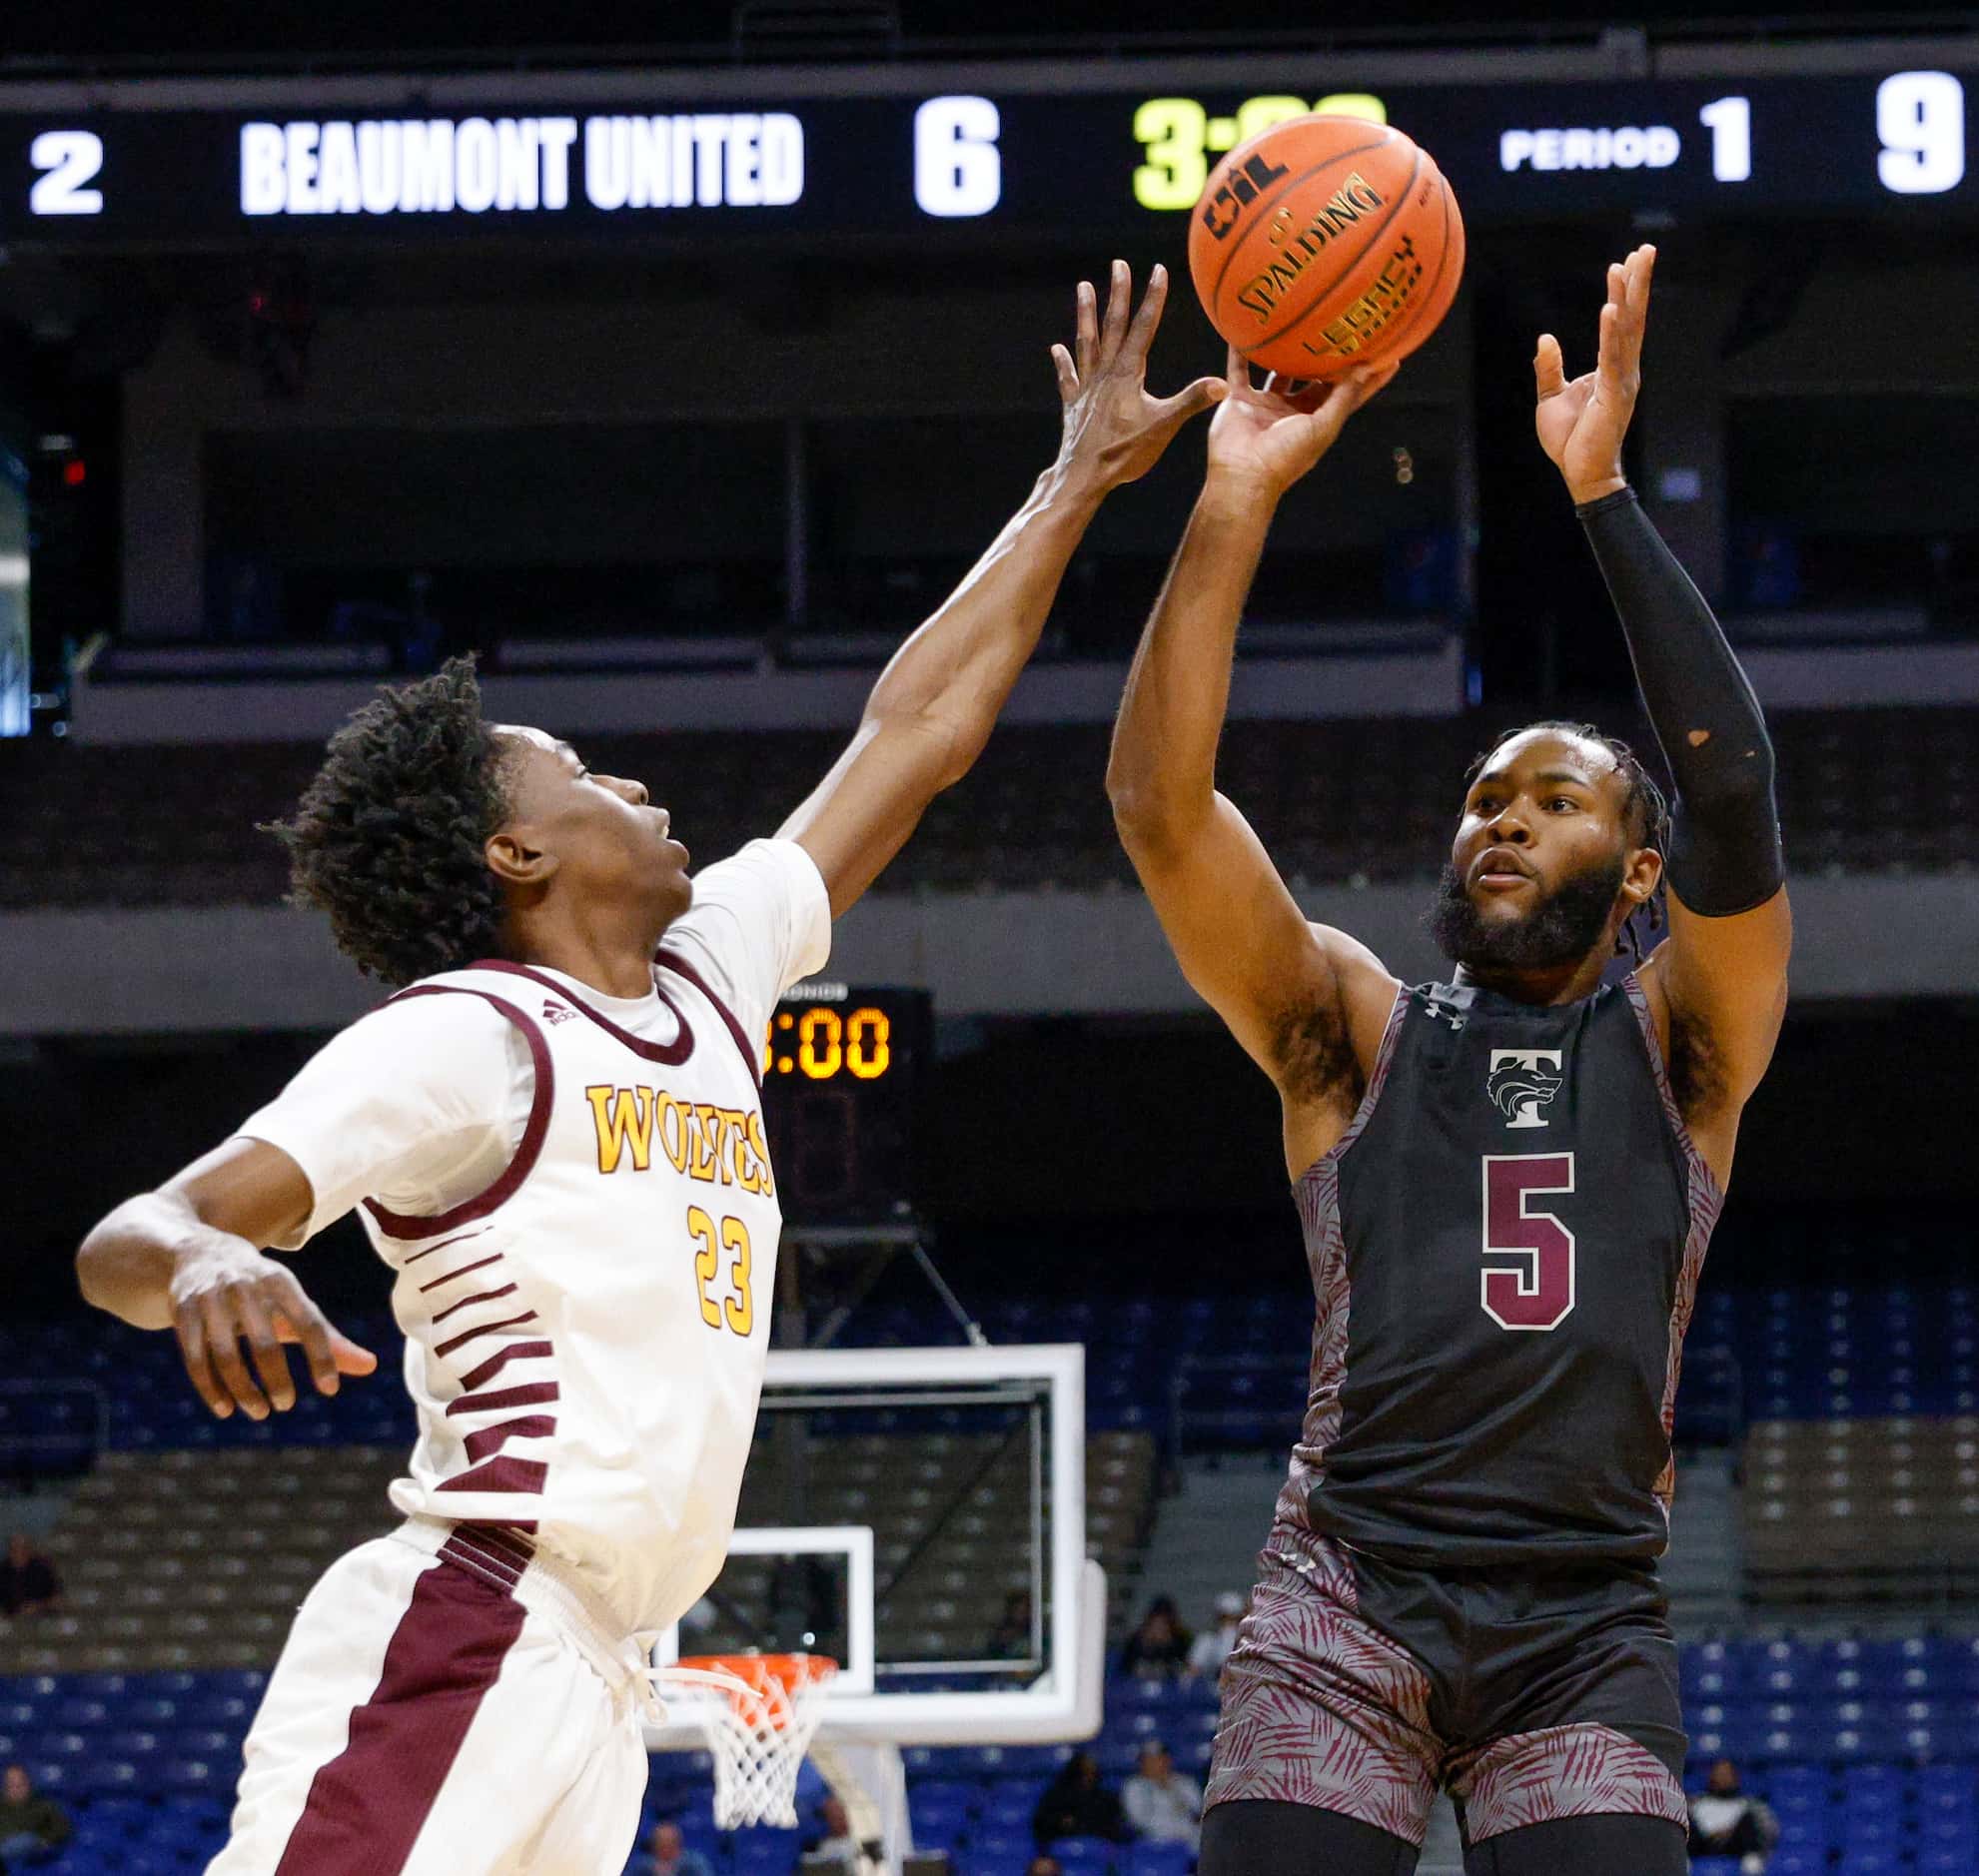 Mansfield Timberview guard Jared Washington (5) launches a shot over Beaumont United forward...